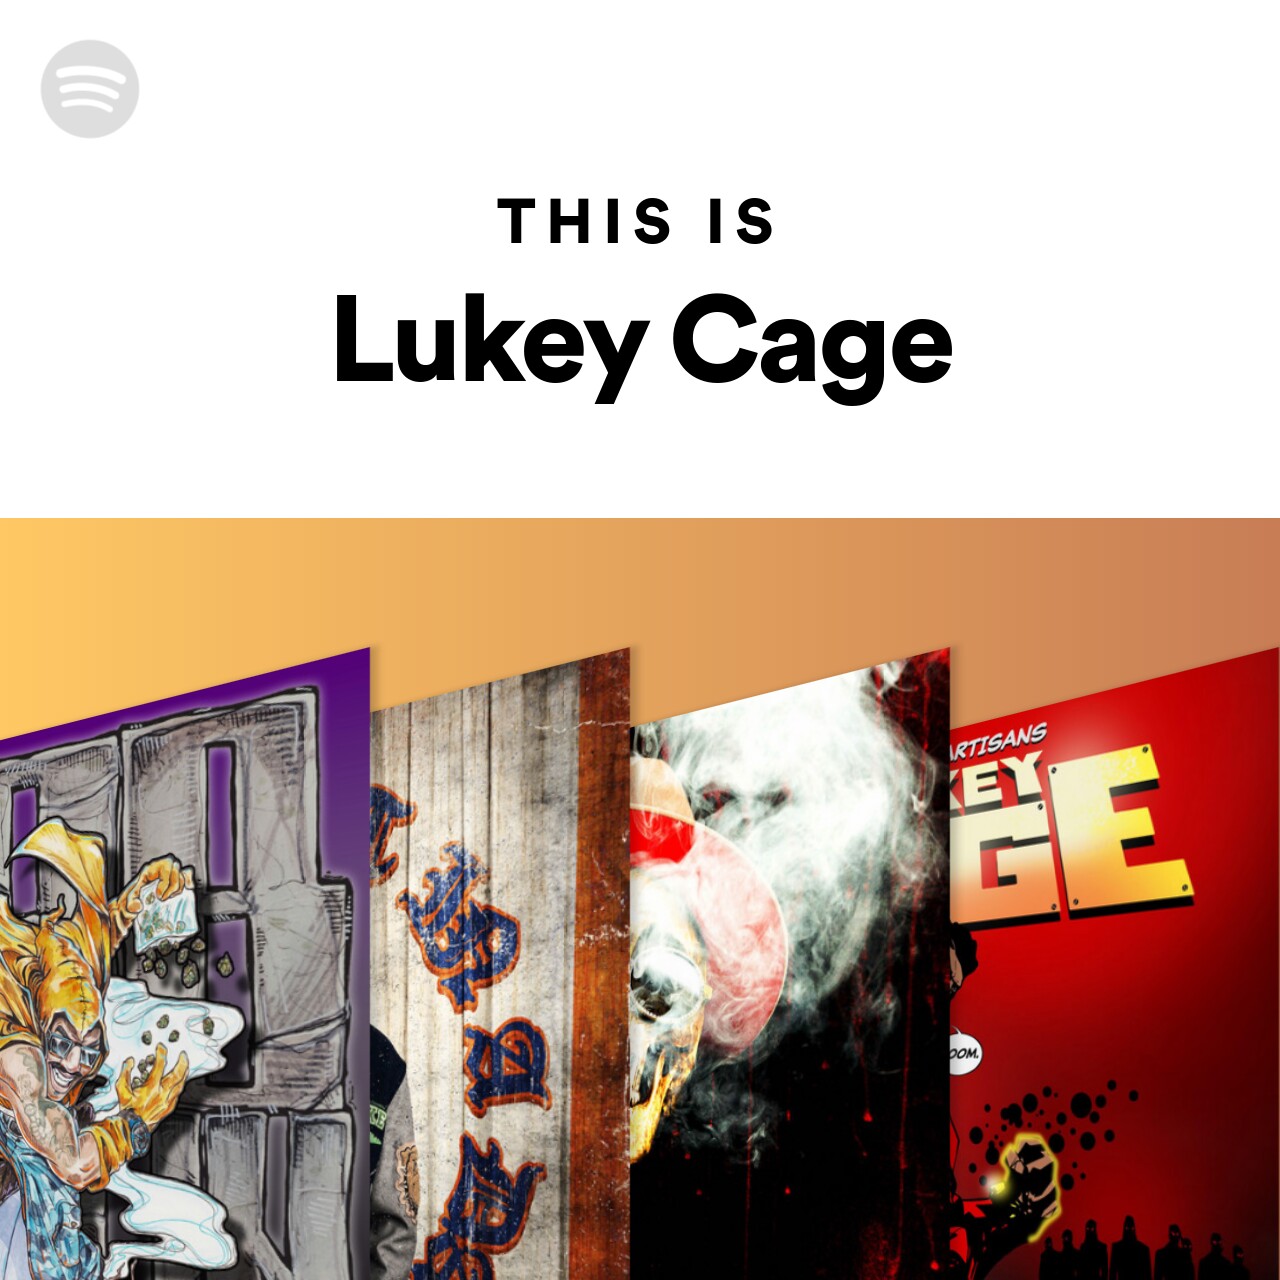 This Is Lukey Cage